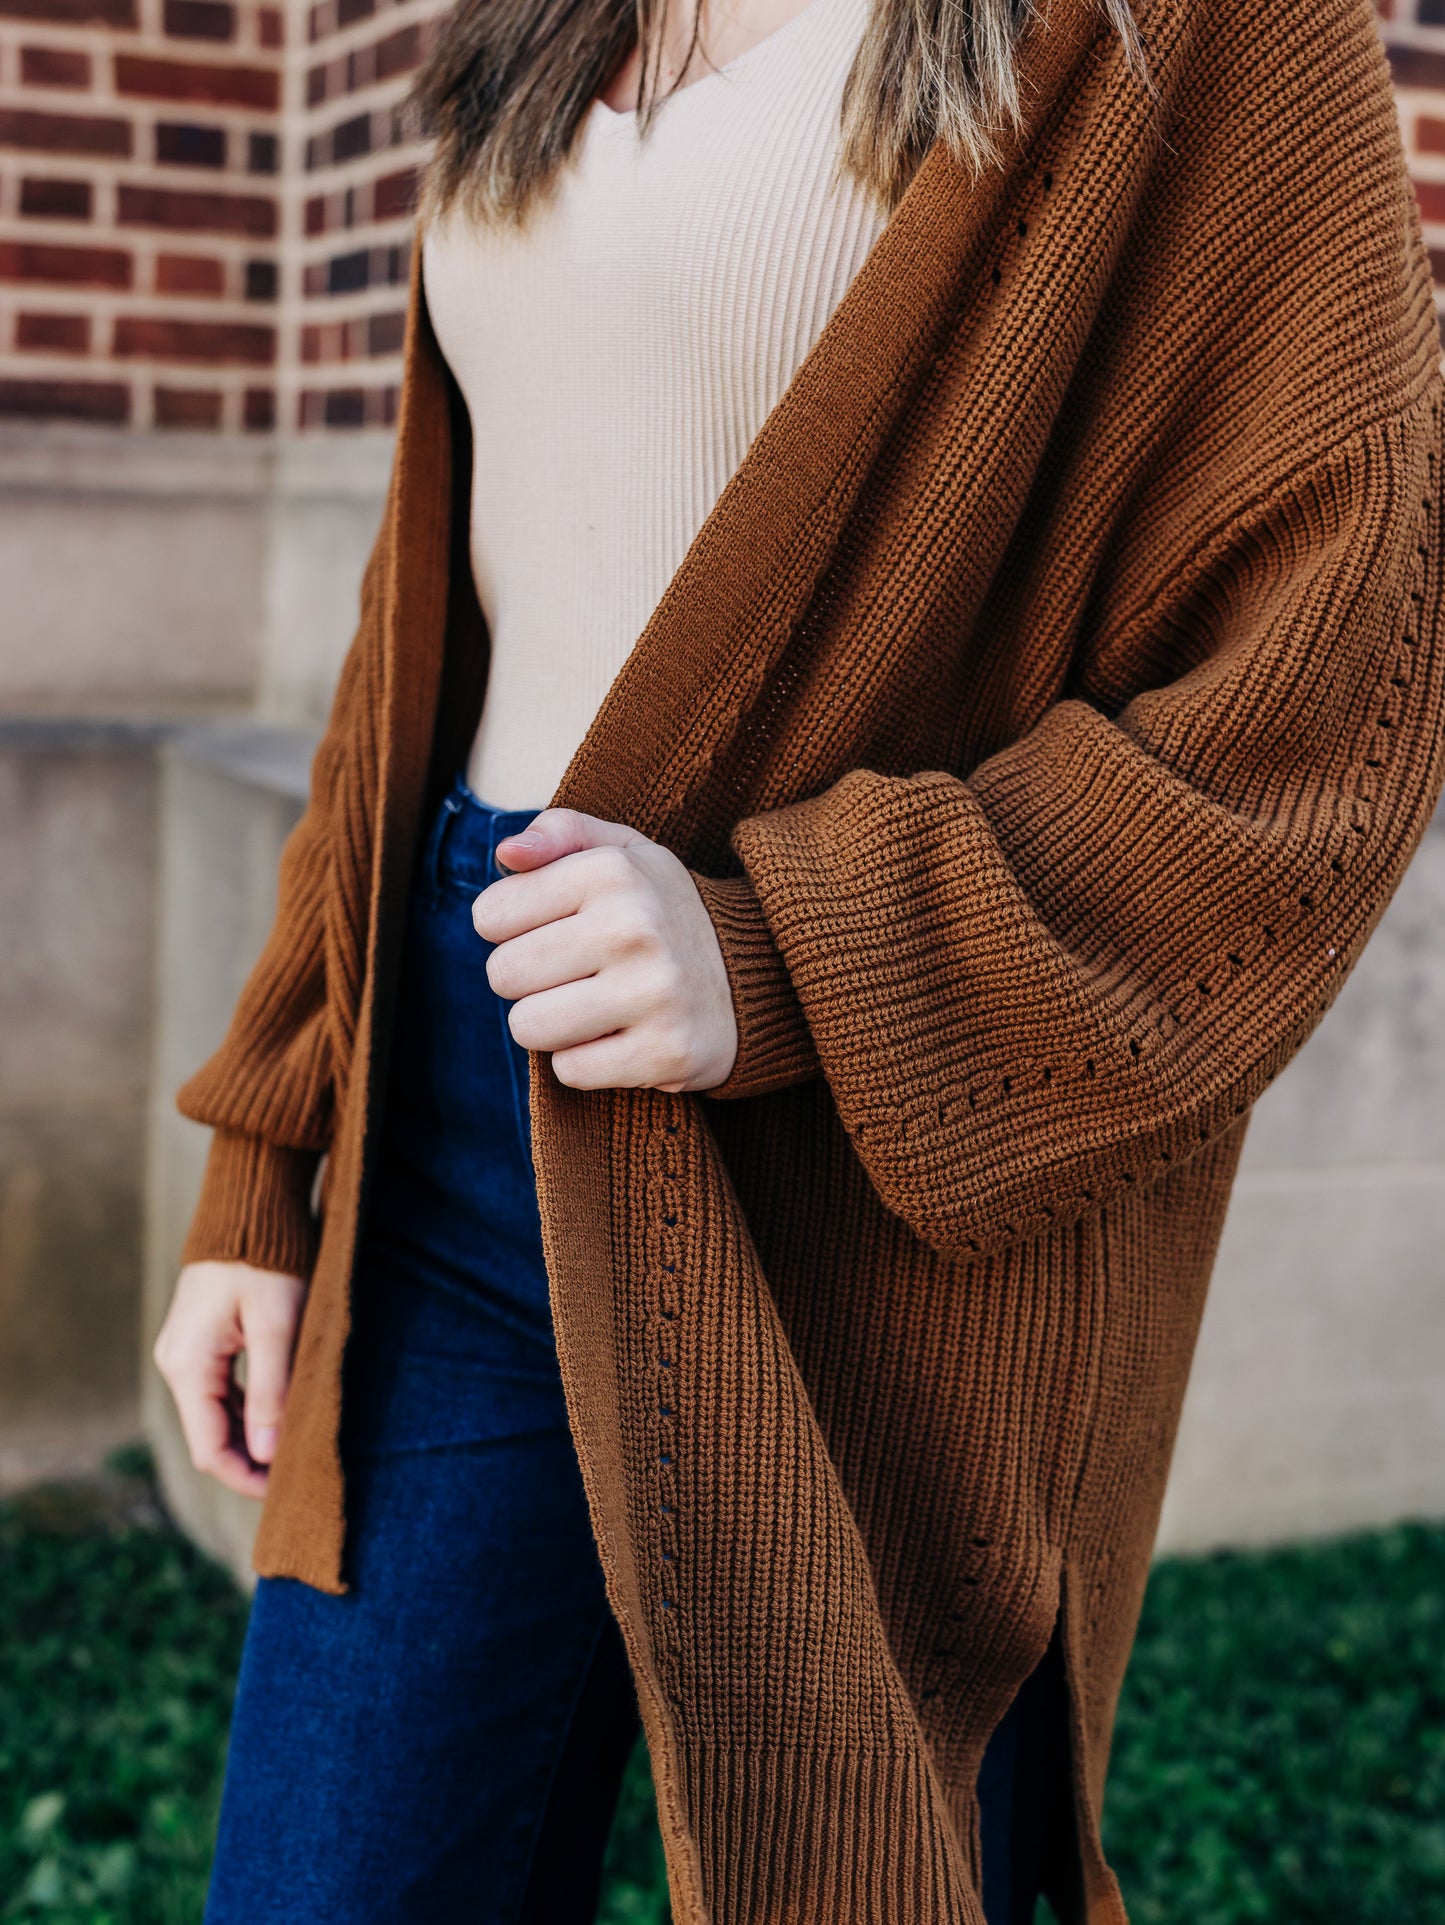 Change Of Heart Pale Brown Cardigan